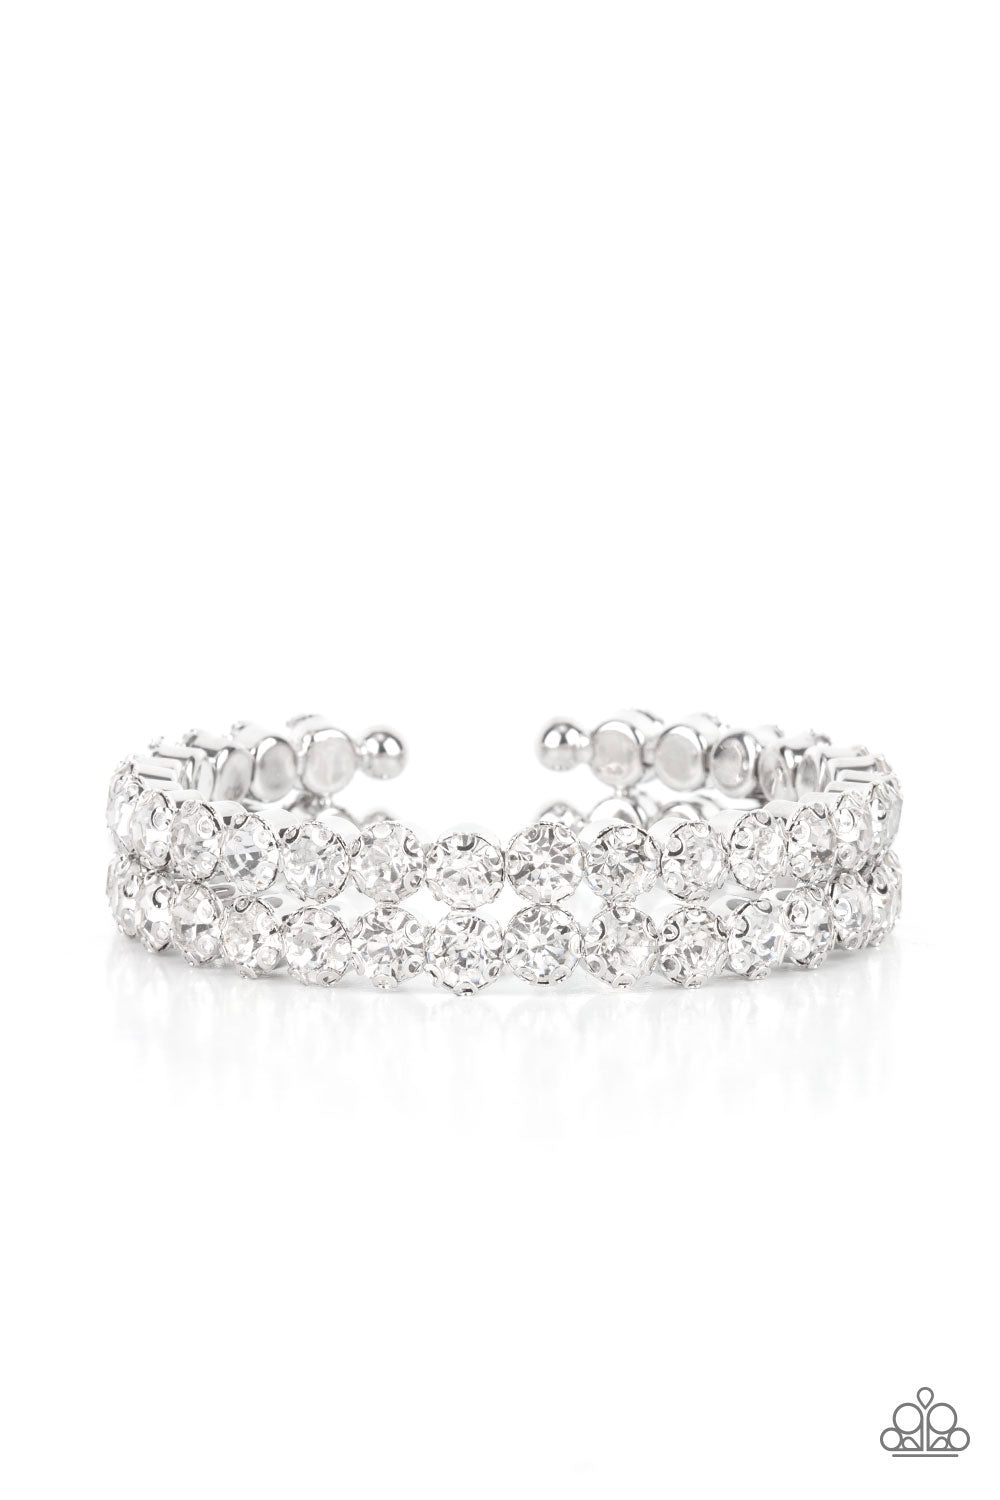 Encased in sleek silver fittings, two oversized rows of glassy white rhinestones stack into a blinding cuff around the wrist